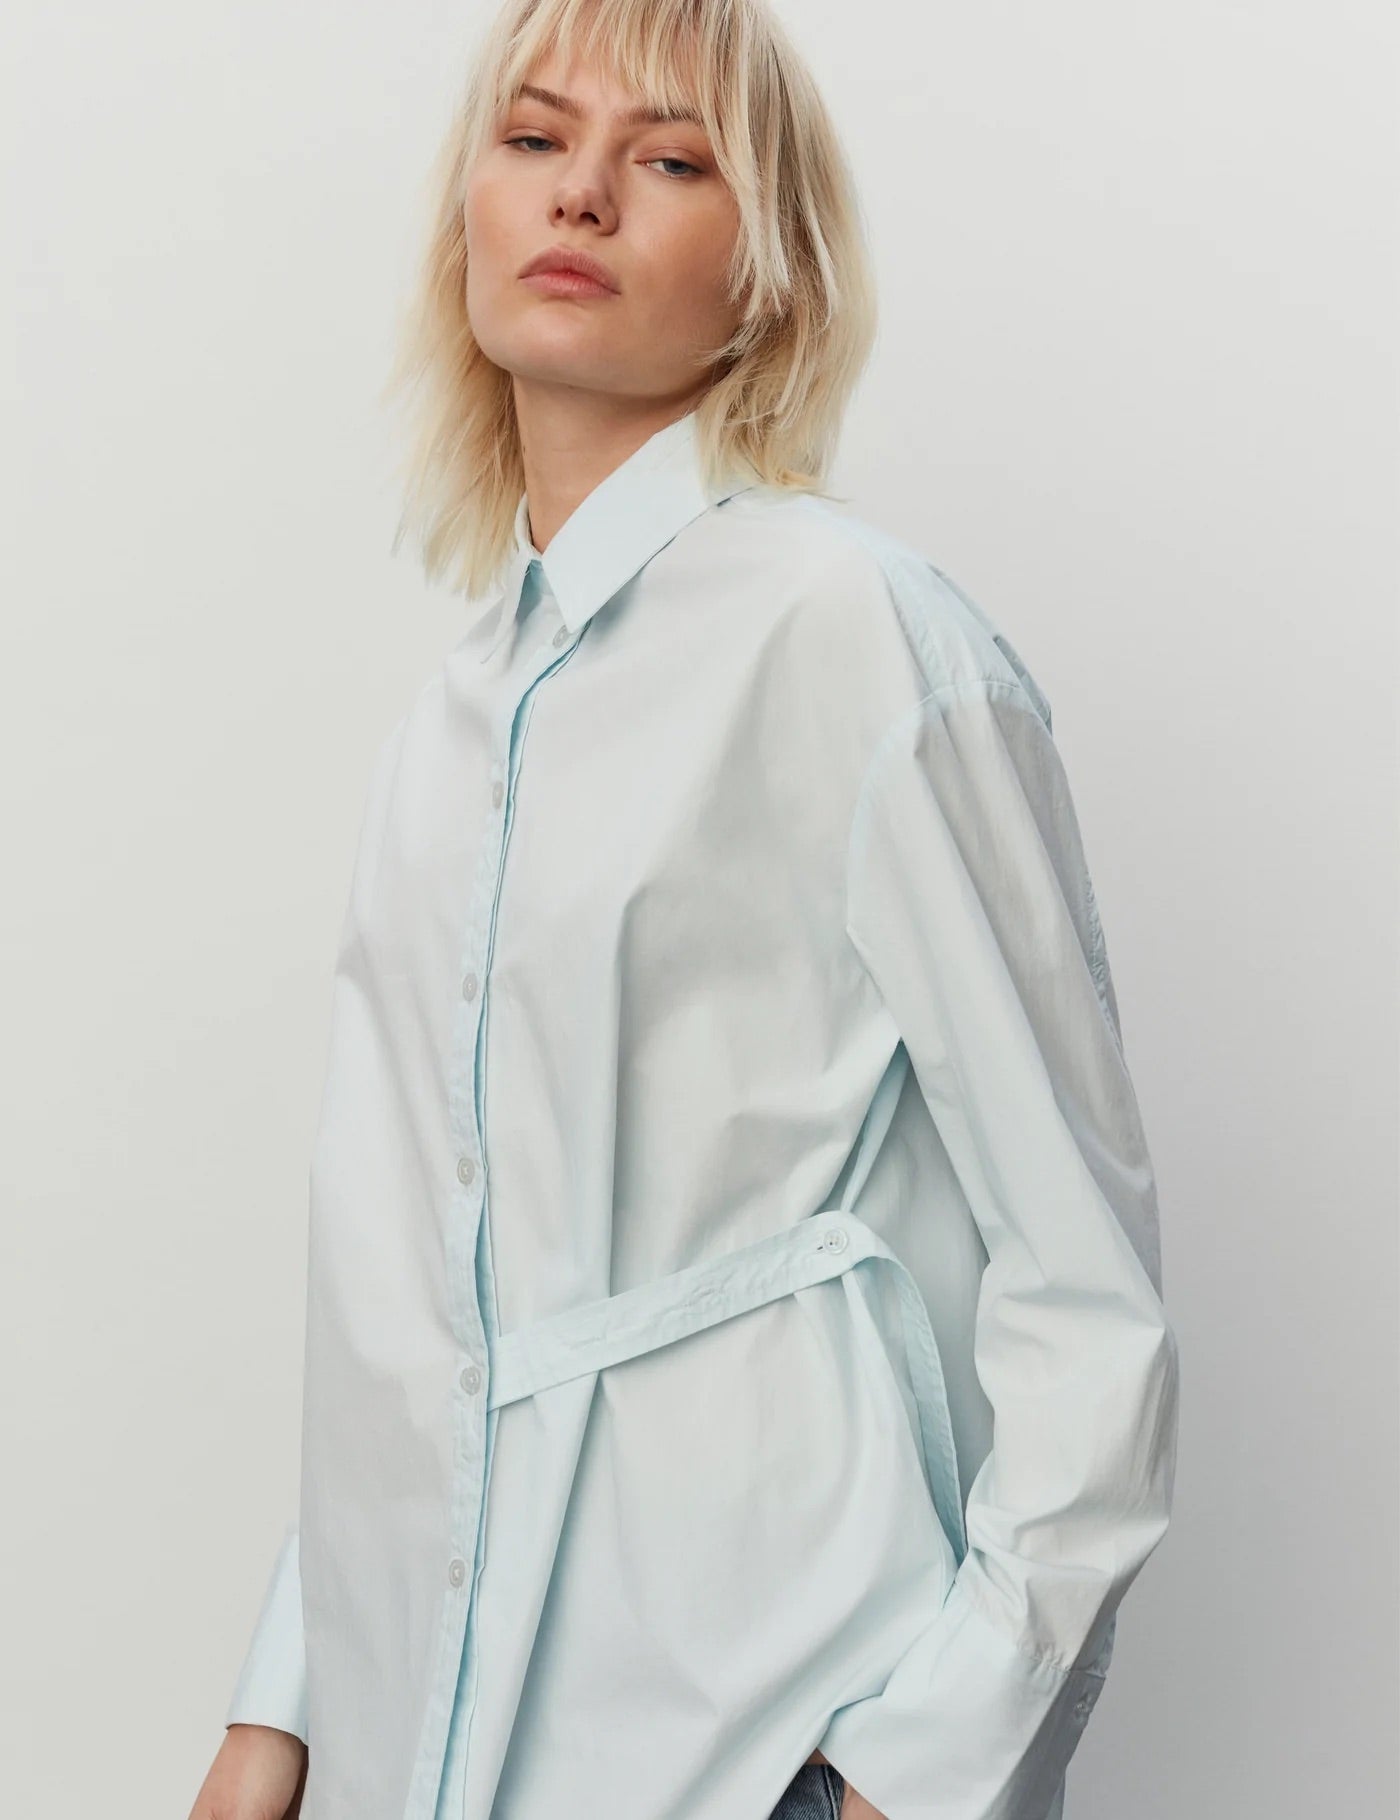 Fionn Blouse - Babs The Label